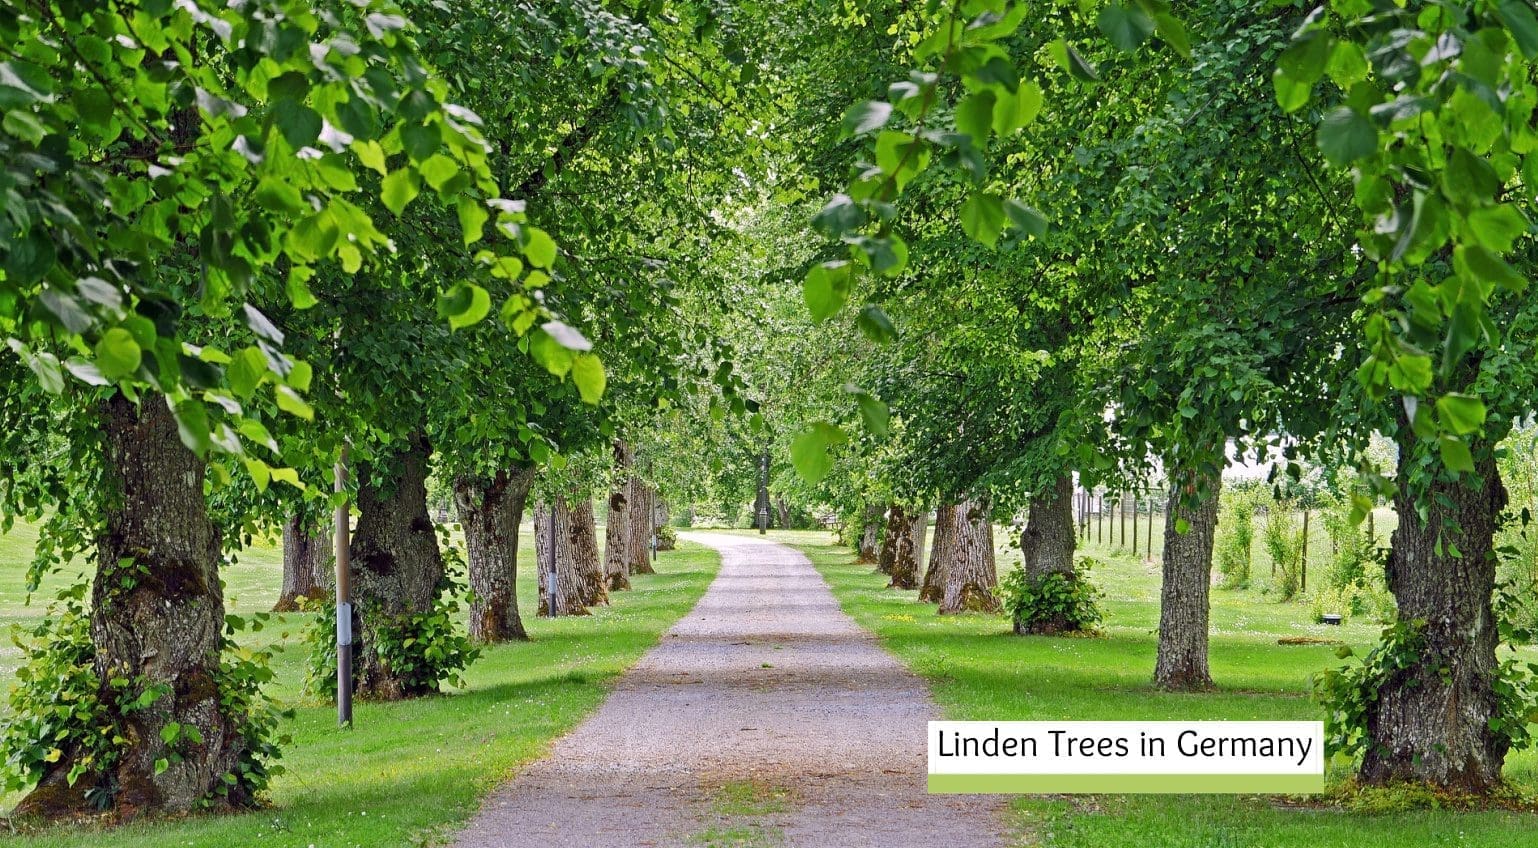 The Linden tree in Germany – At the Heart of Germany